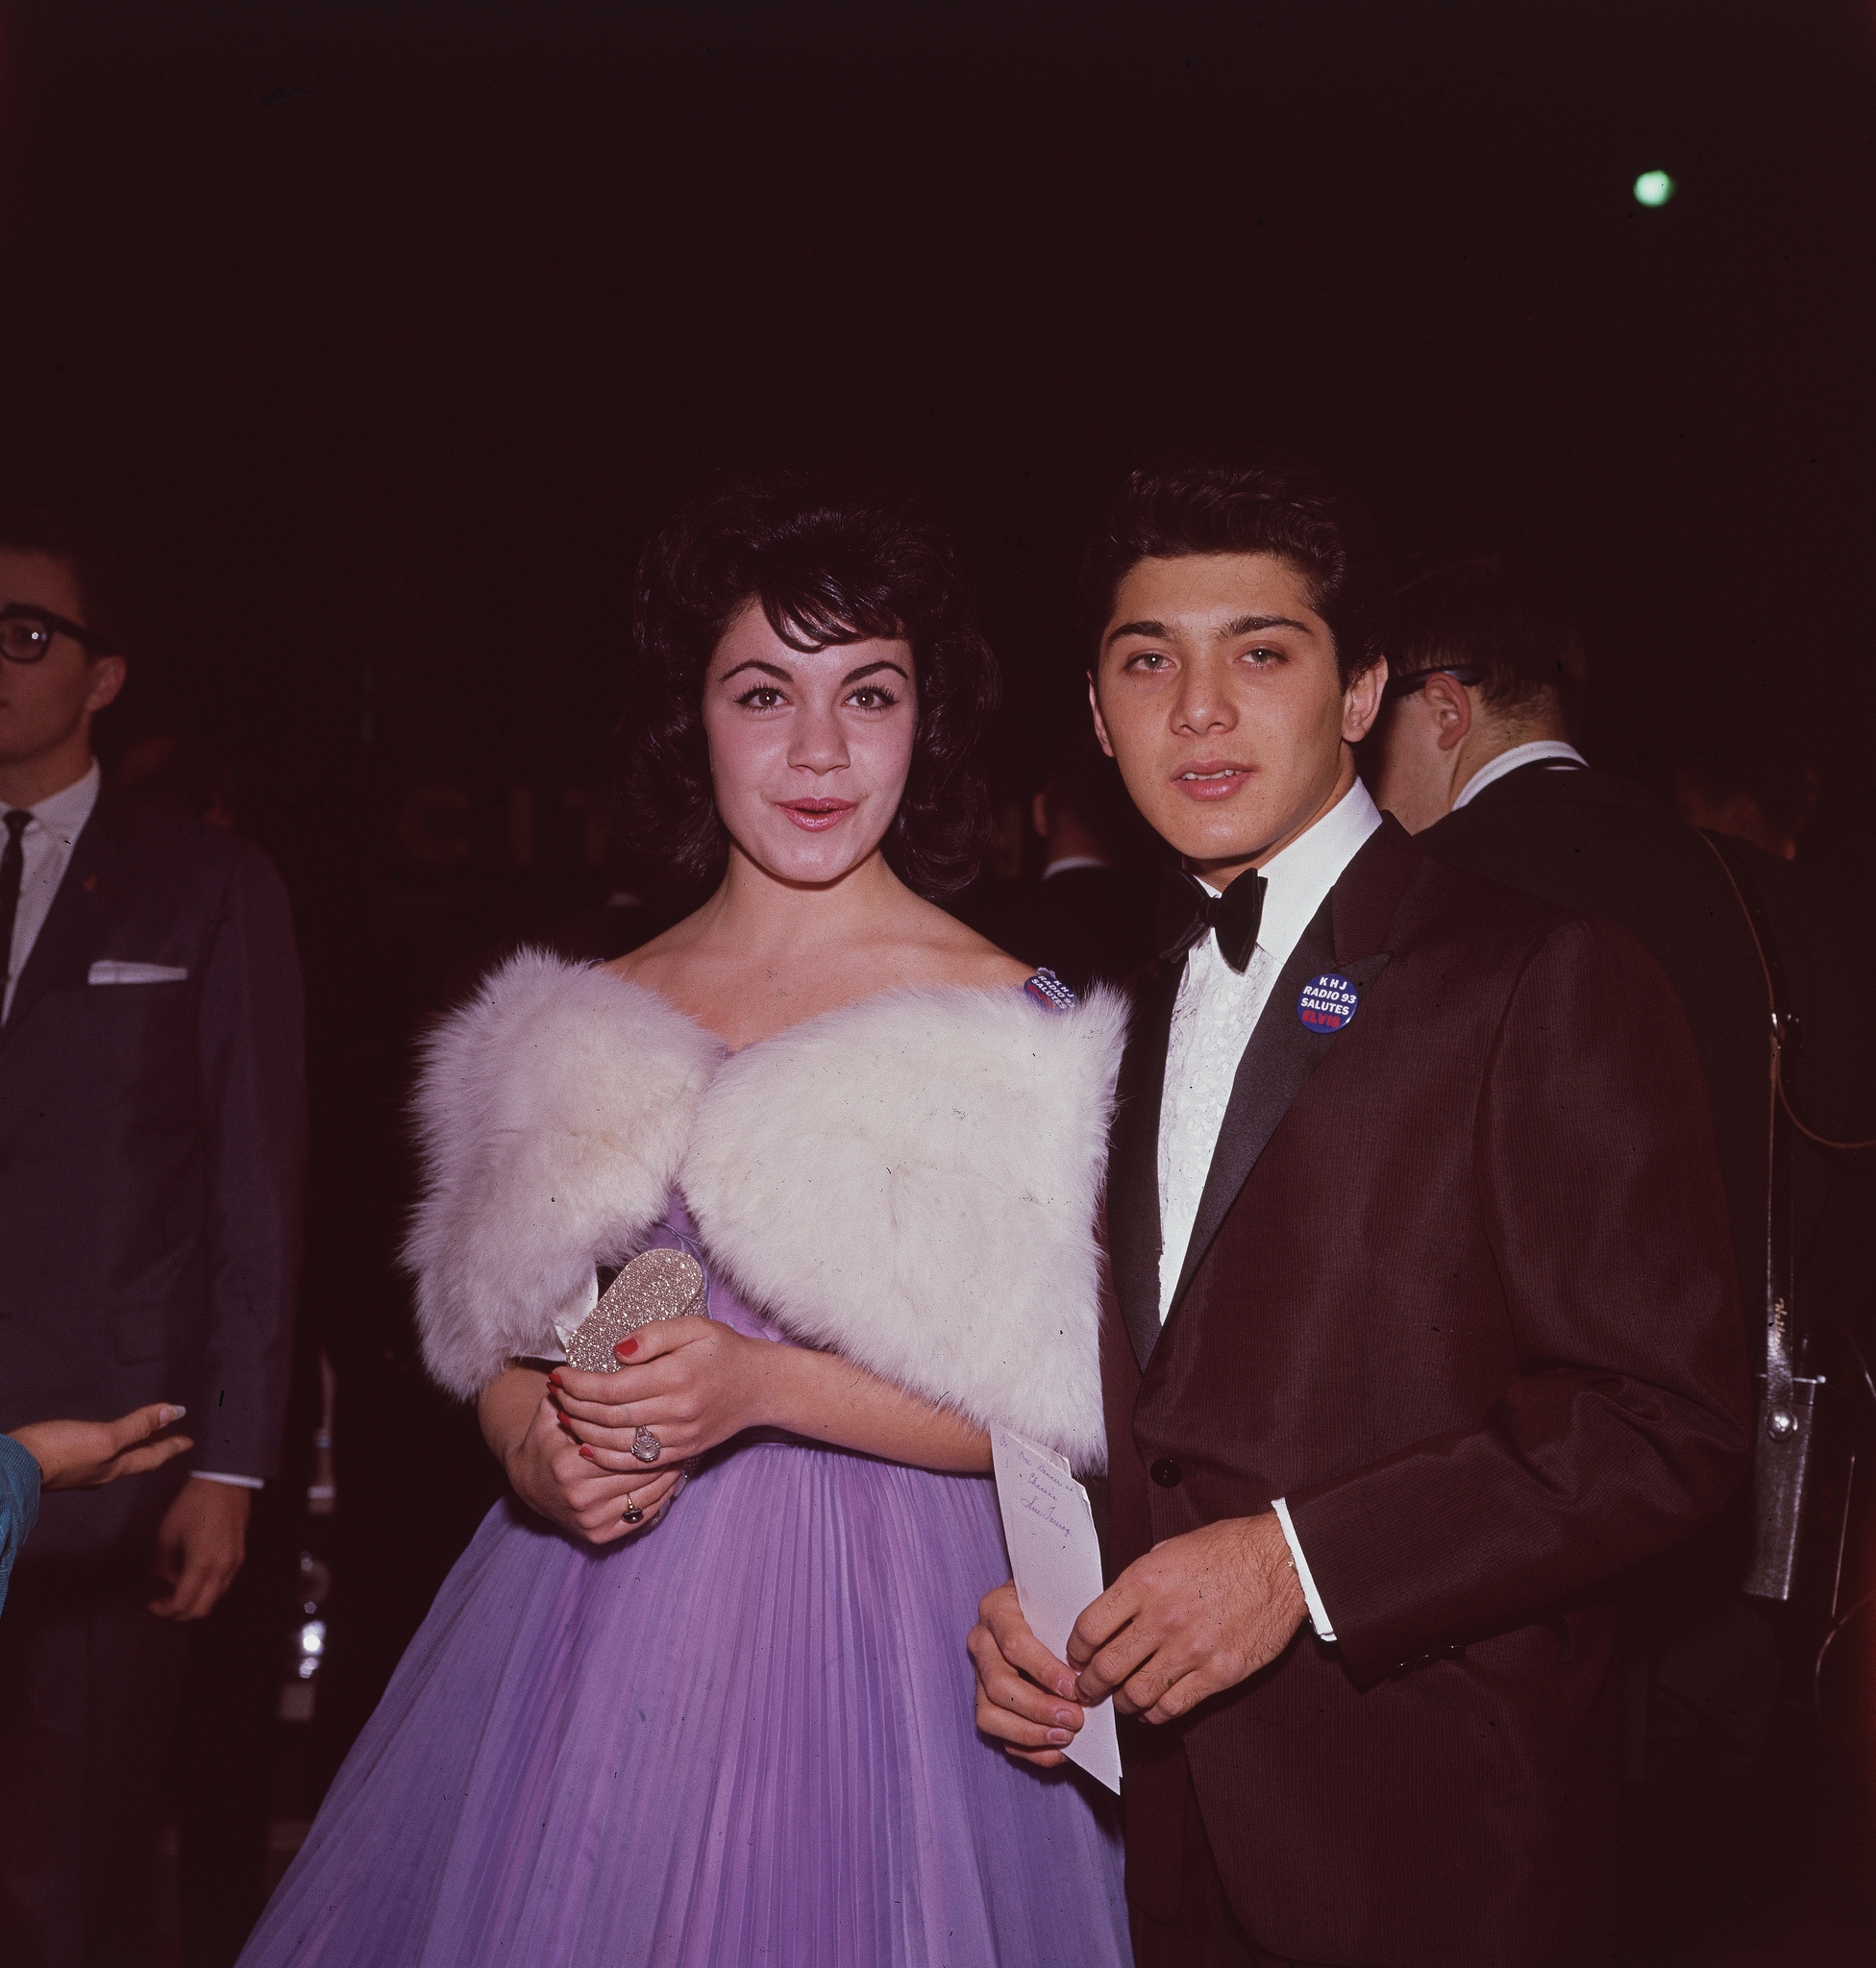 Paul Anka and Annette Funicello